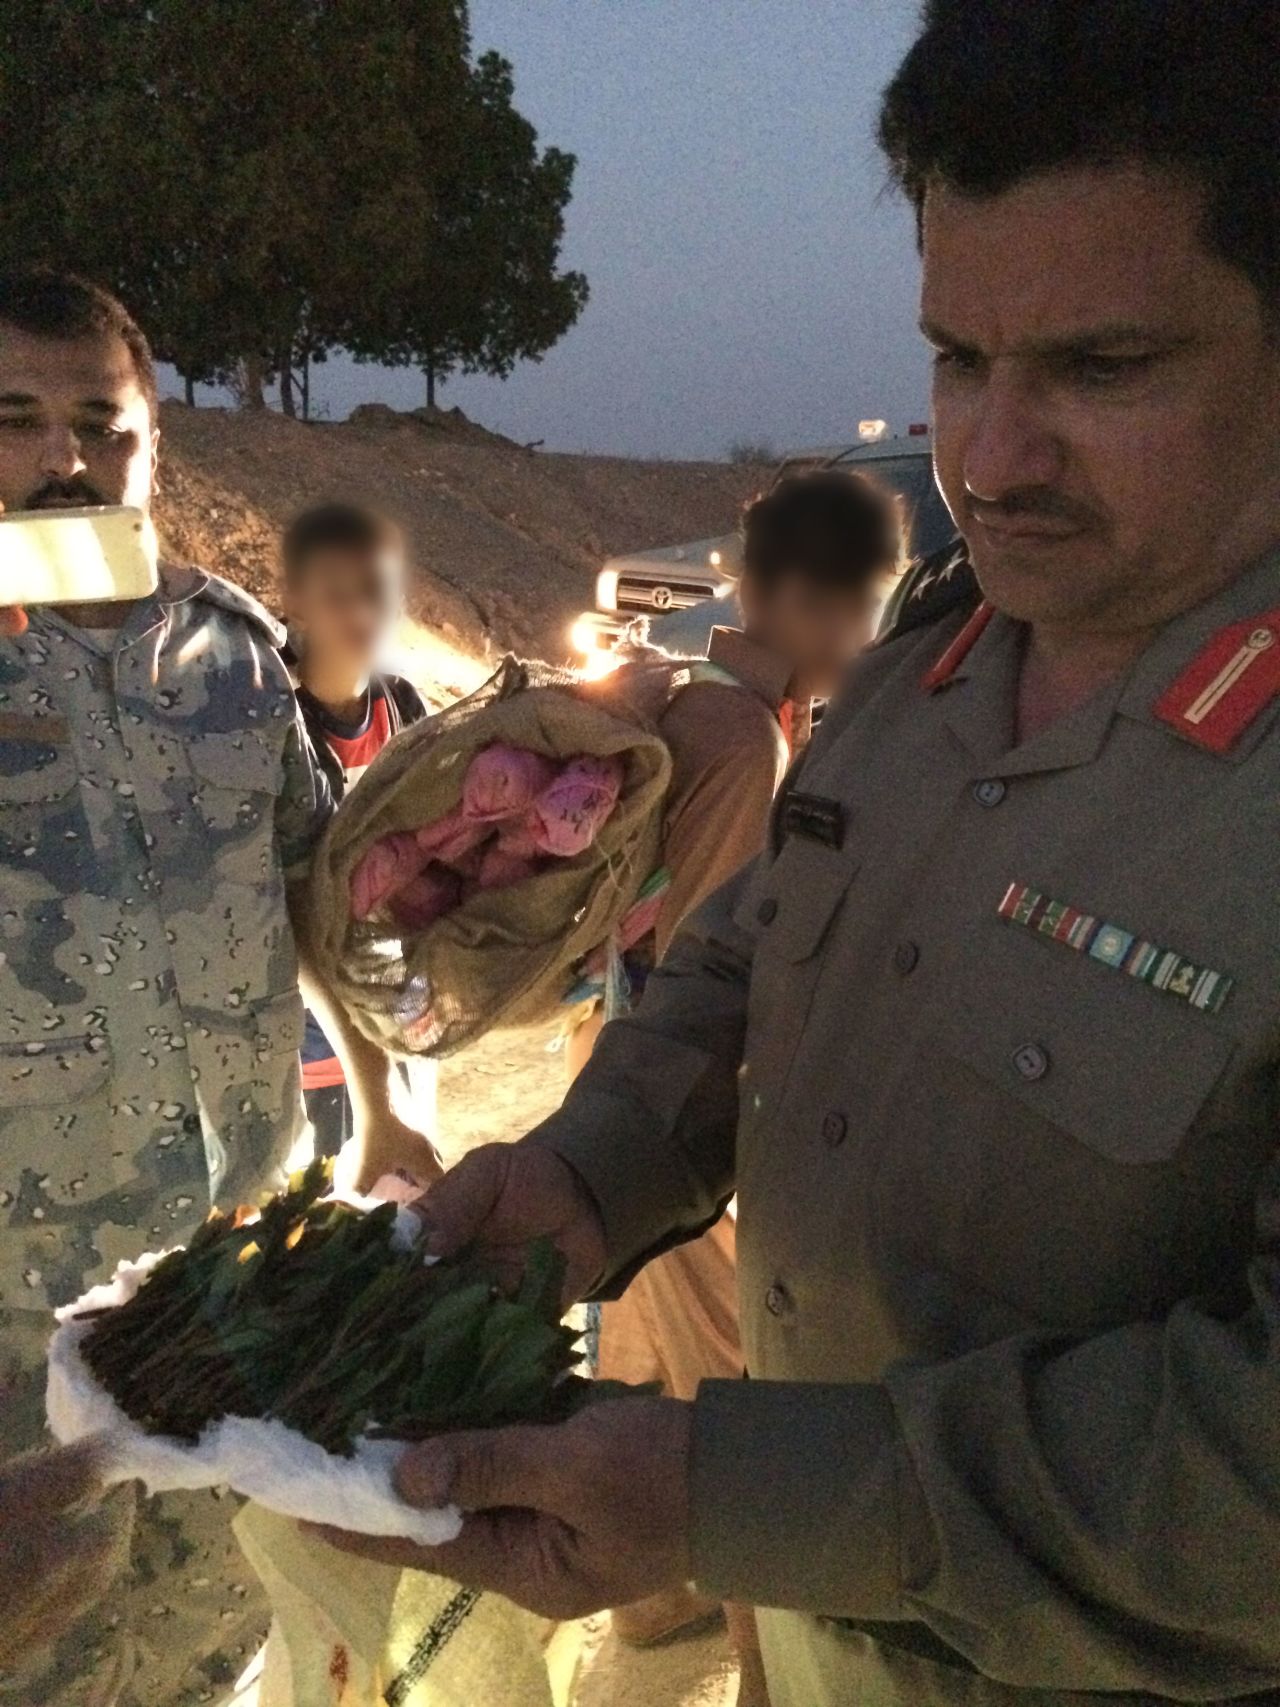 These two youths were detained with the narcotic shrub qat that most Yemenis chew every day,